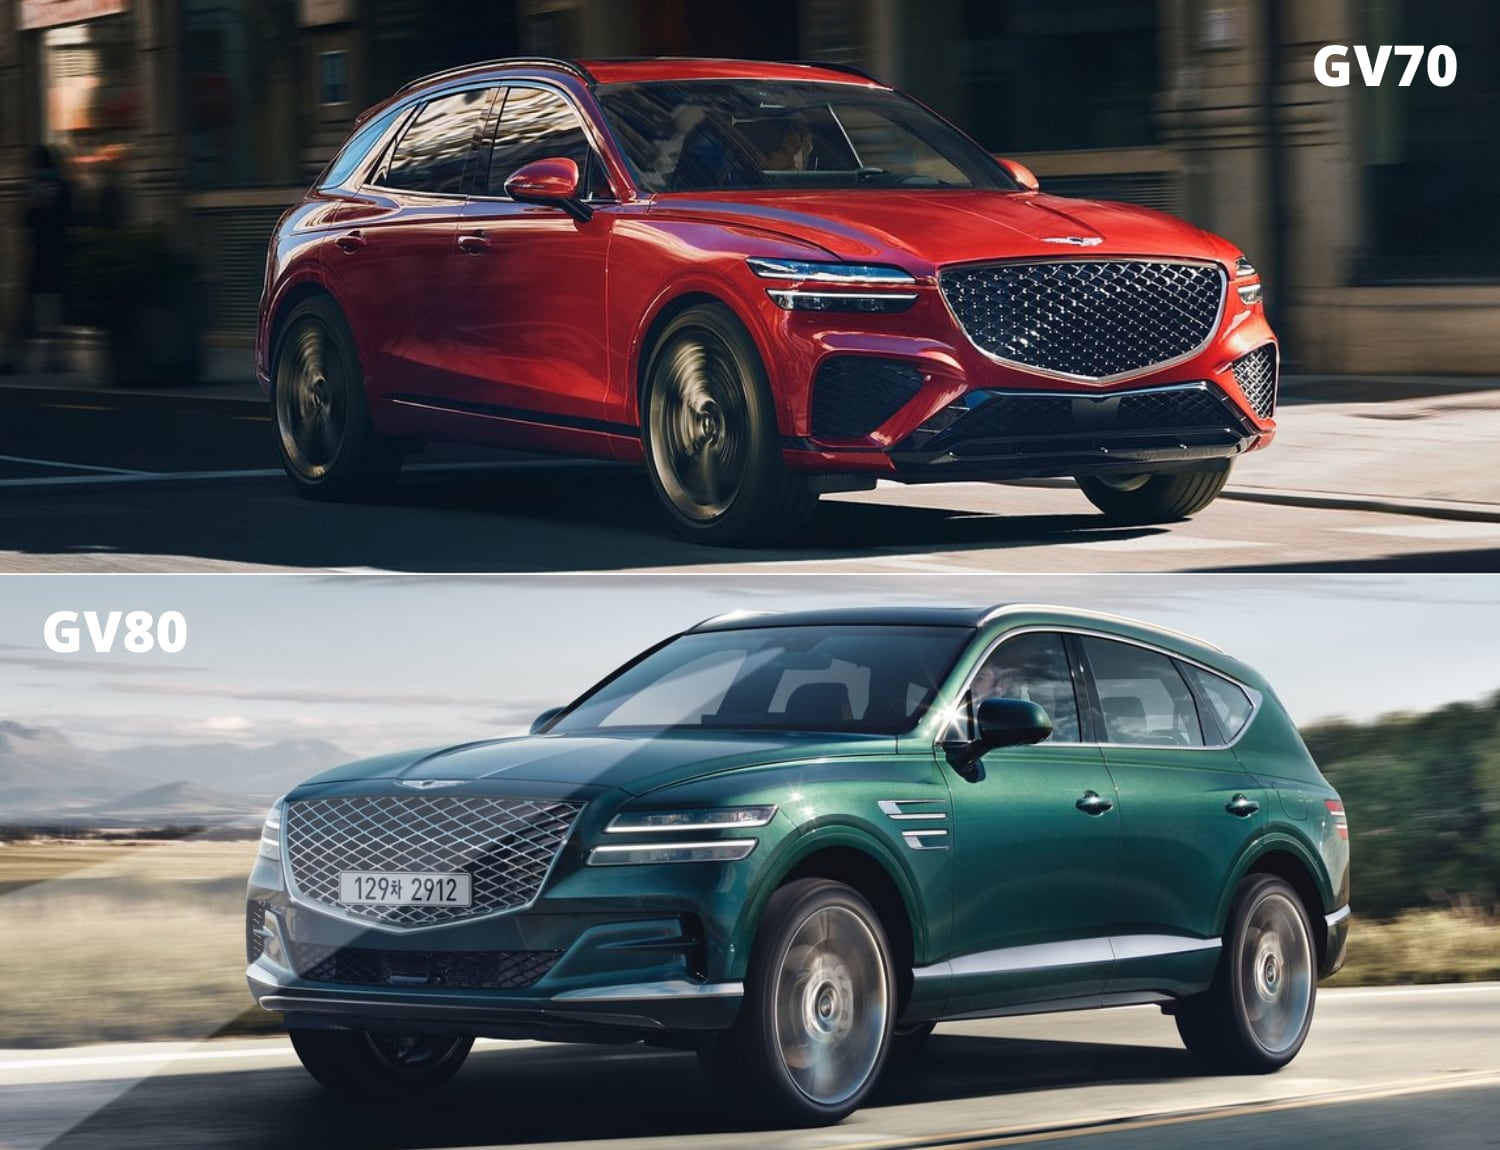 Exterior comparison of the 2022 Genesis GV70 next to the 2021 Genesis GV80 the first two SUVs produced by Genesis